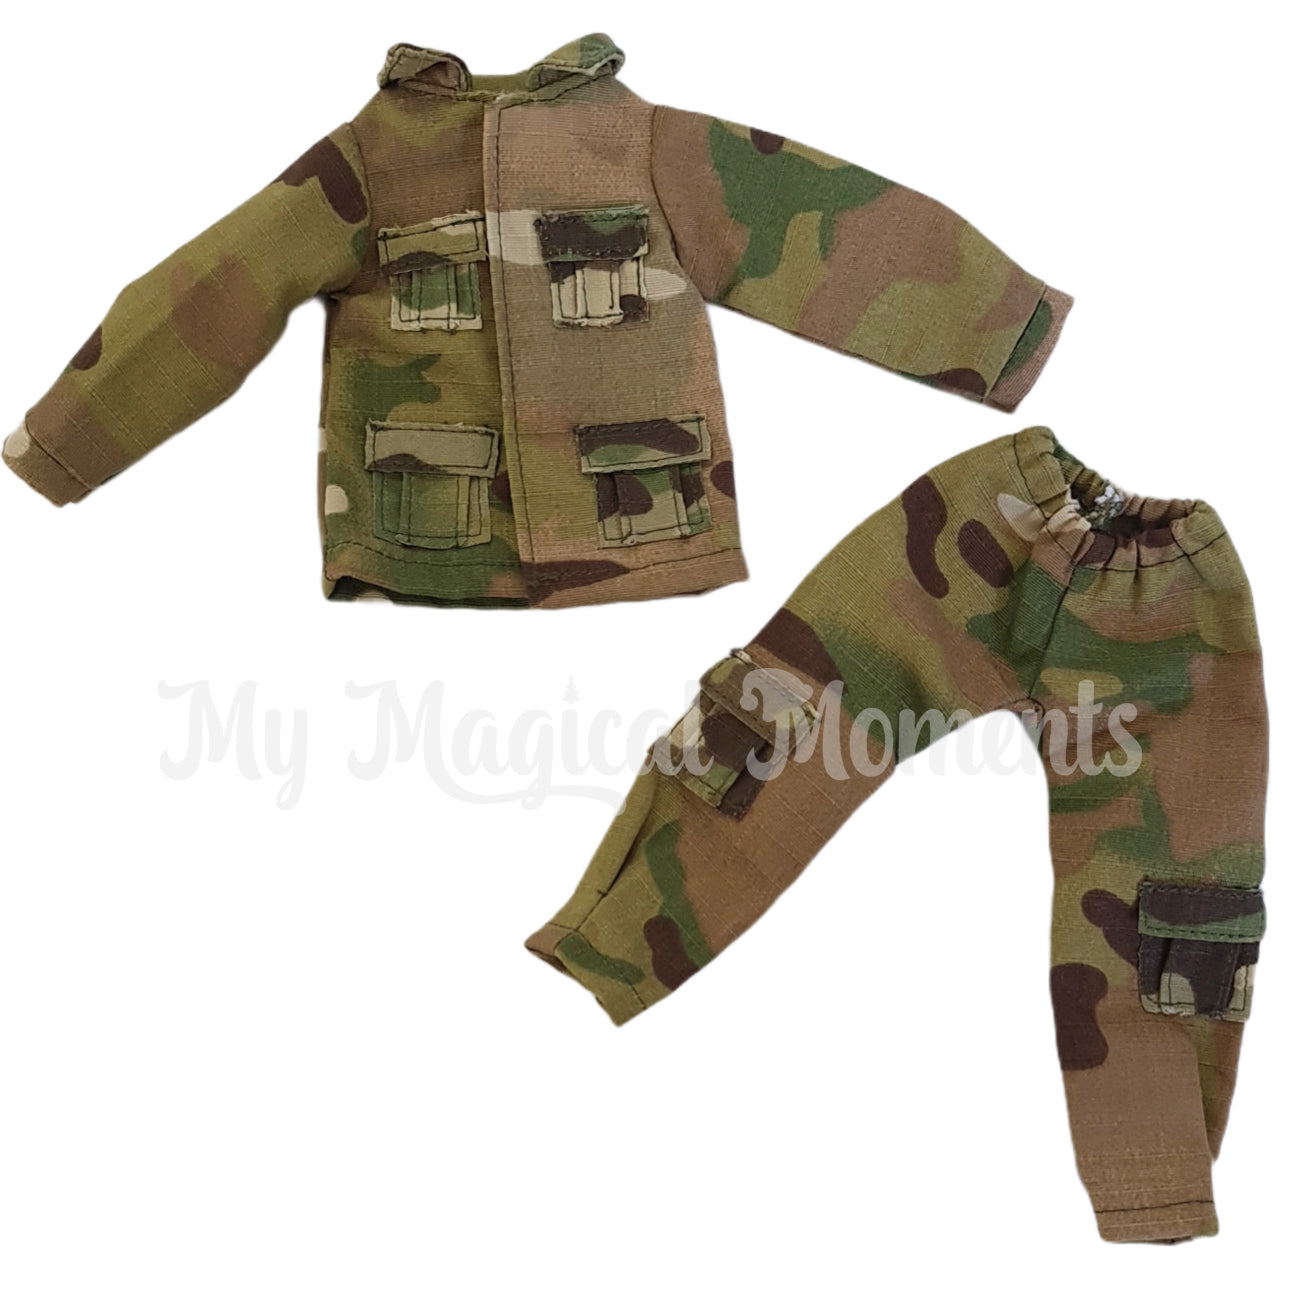 Army elf costume, top and pants